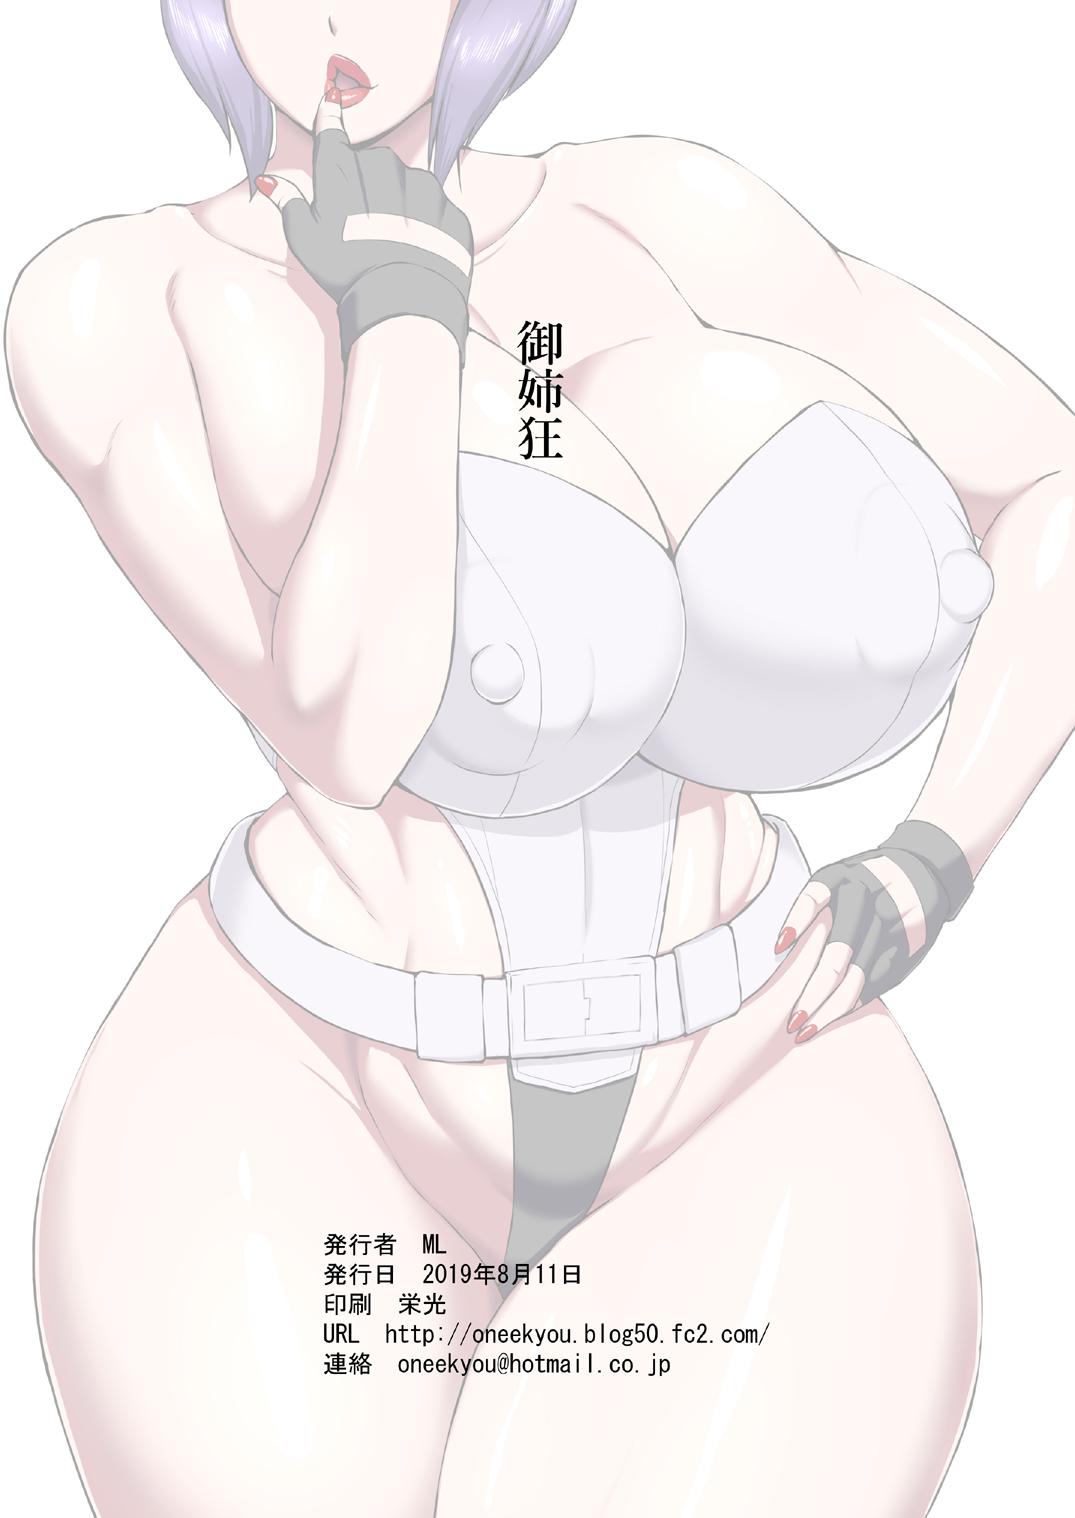 Gay Cock Shotagui Mesu Gorilla - Ghost in the shell Gets - Page 2